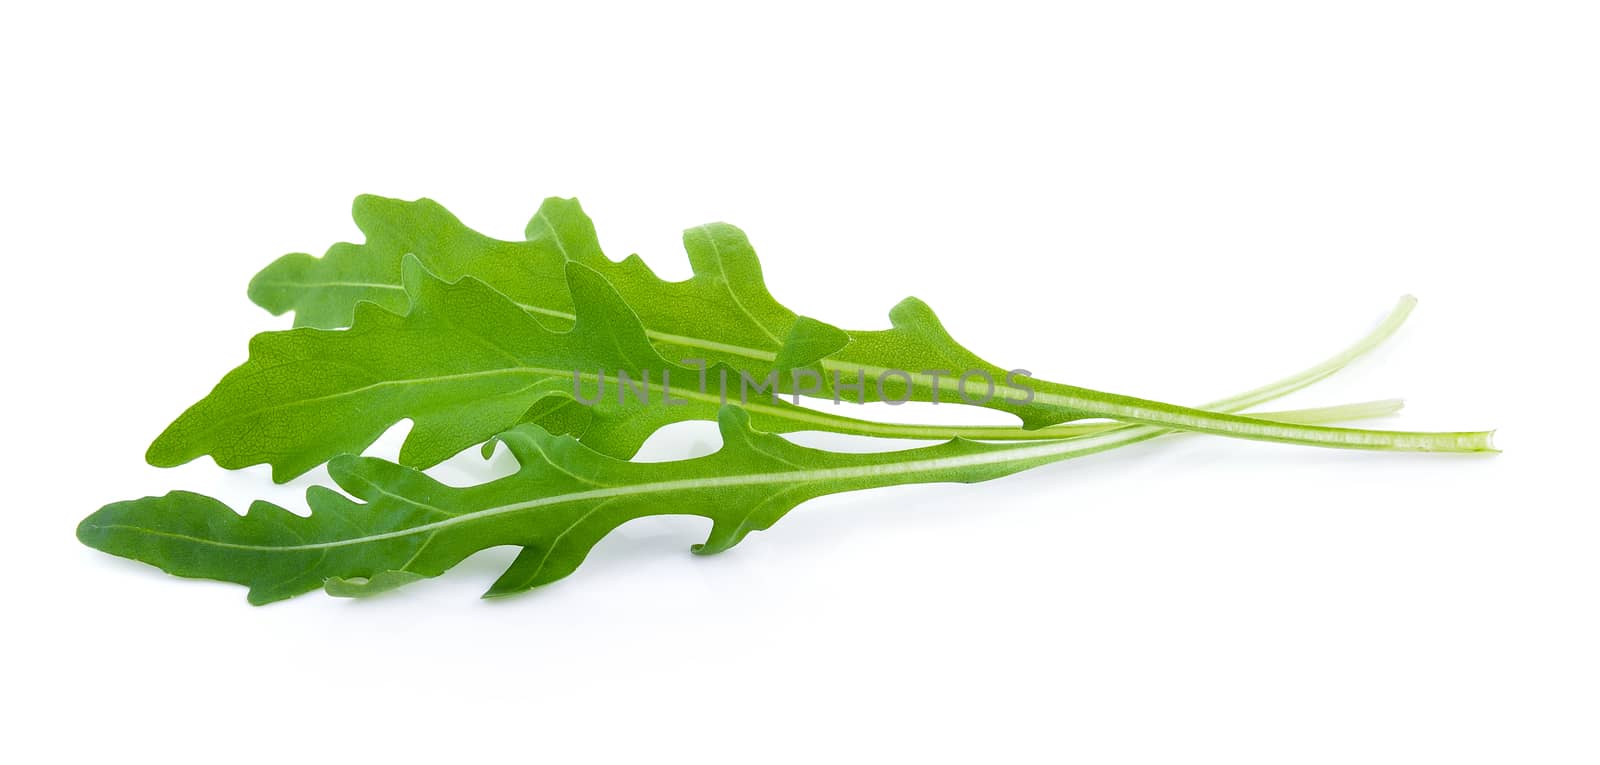 Sweet rucola salad or rocket lettuce leaves isolated on white ba by sommai